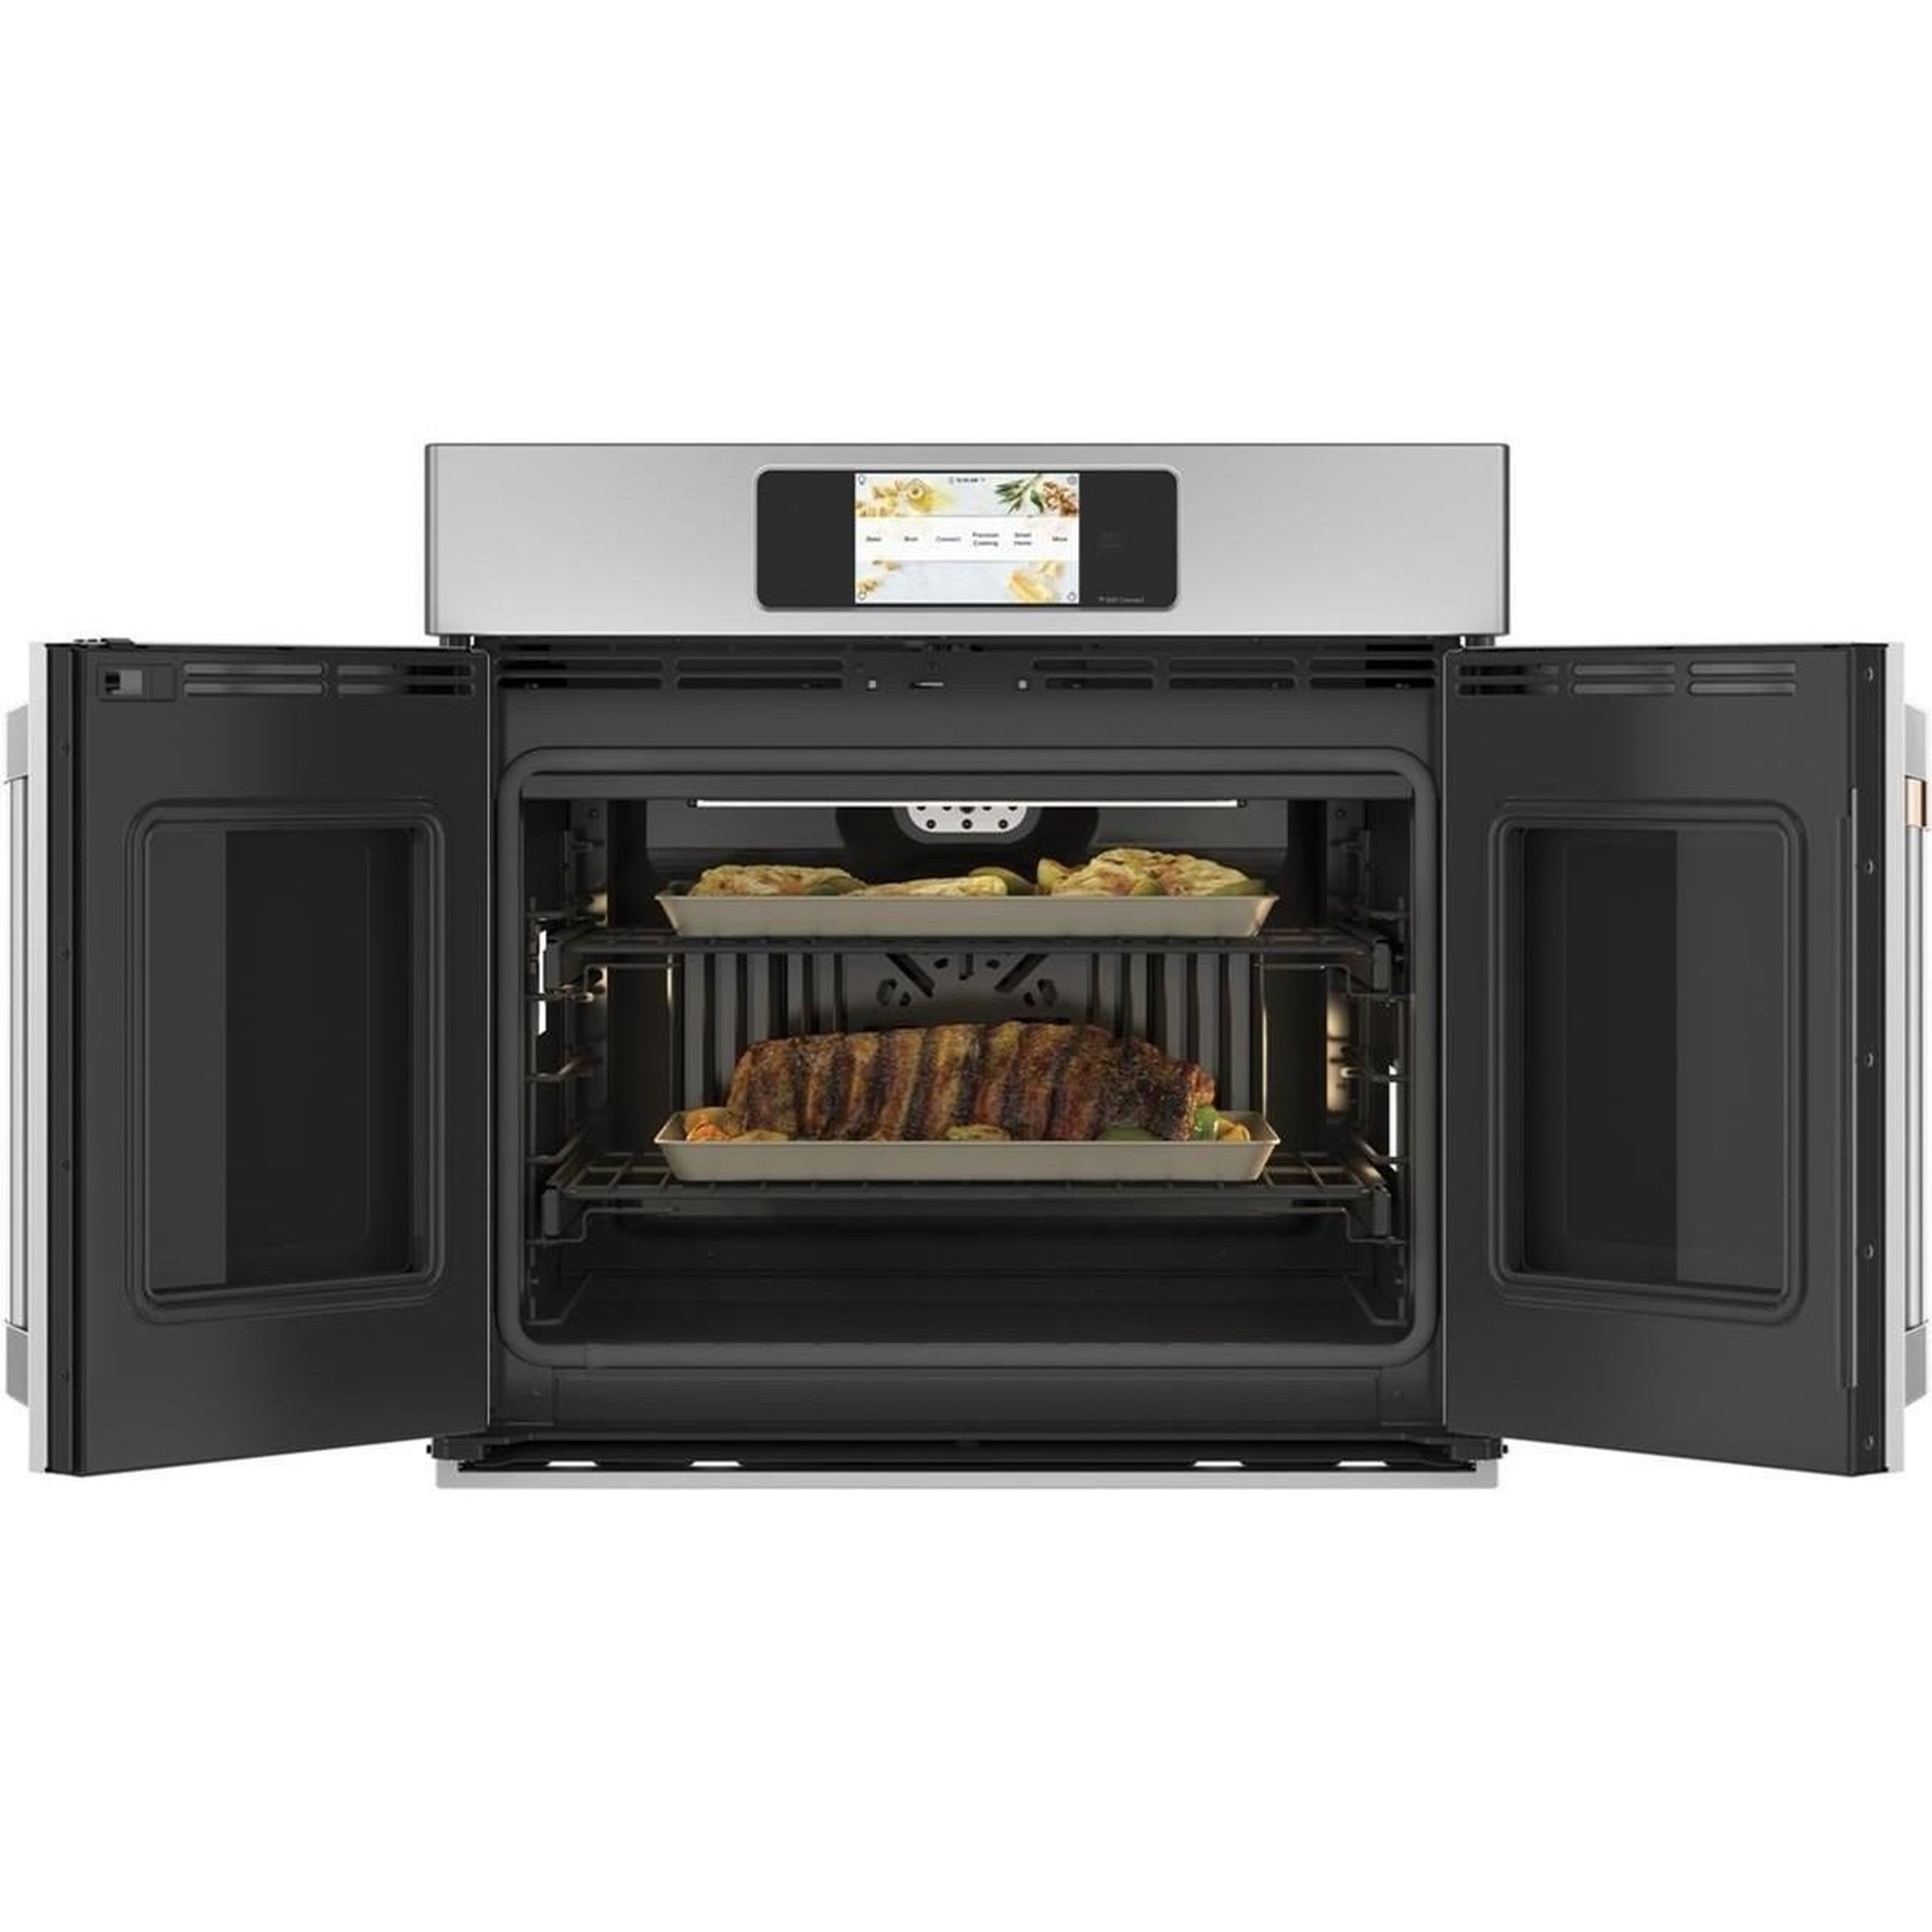 https://imageresizer4.furnituredealer.net/img/remote/images.furnituredealer.net/img/products%2Fge_appliances%2Fcolor%2Fge%20electric%20wall%20ovens%20-%202015_cts90fp2ns1-b3.jpg?width=2000&height=2000&scale=both